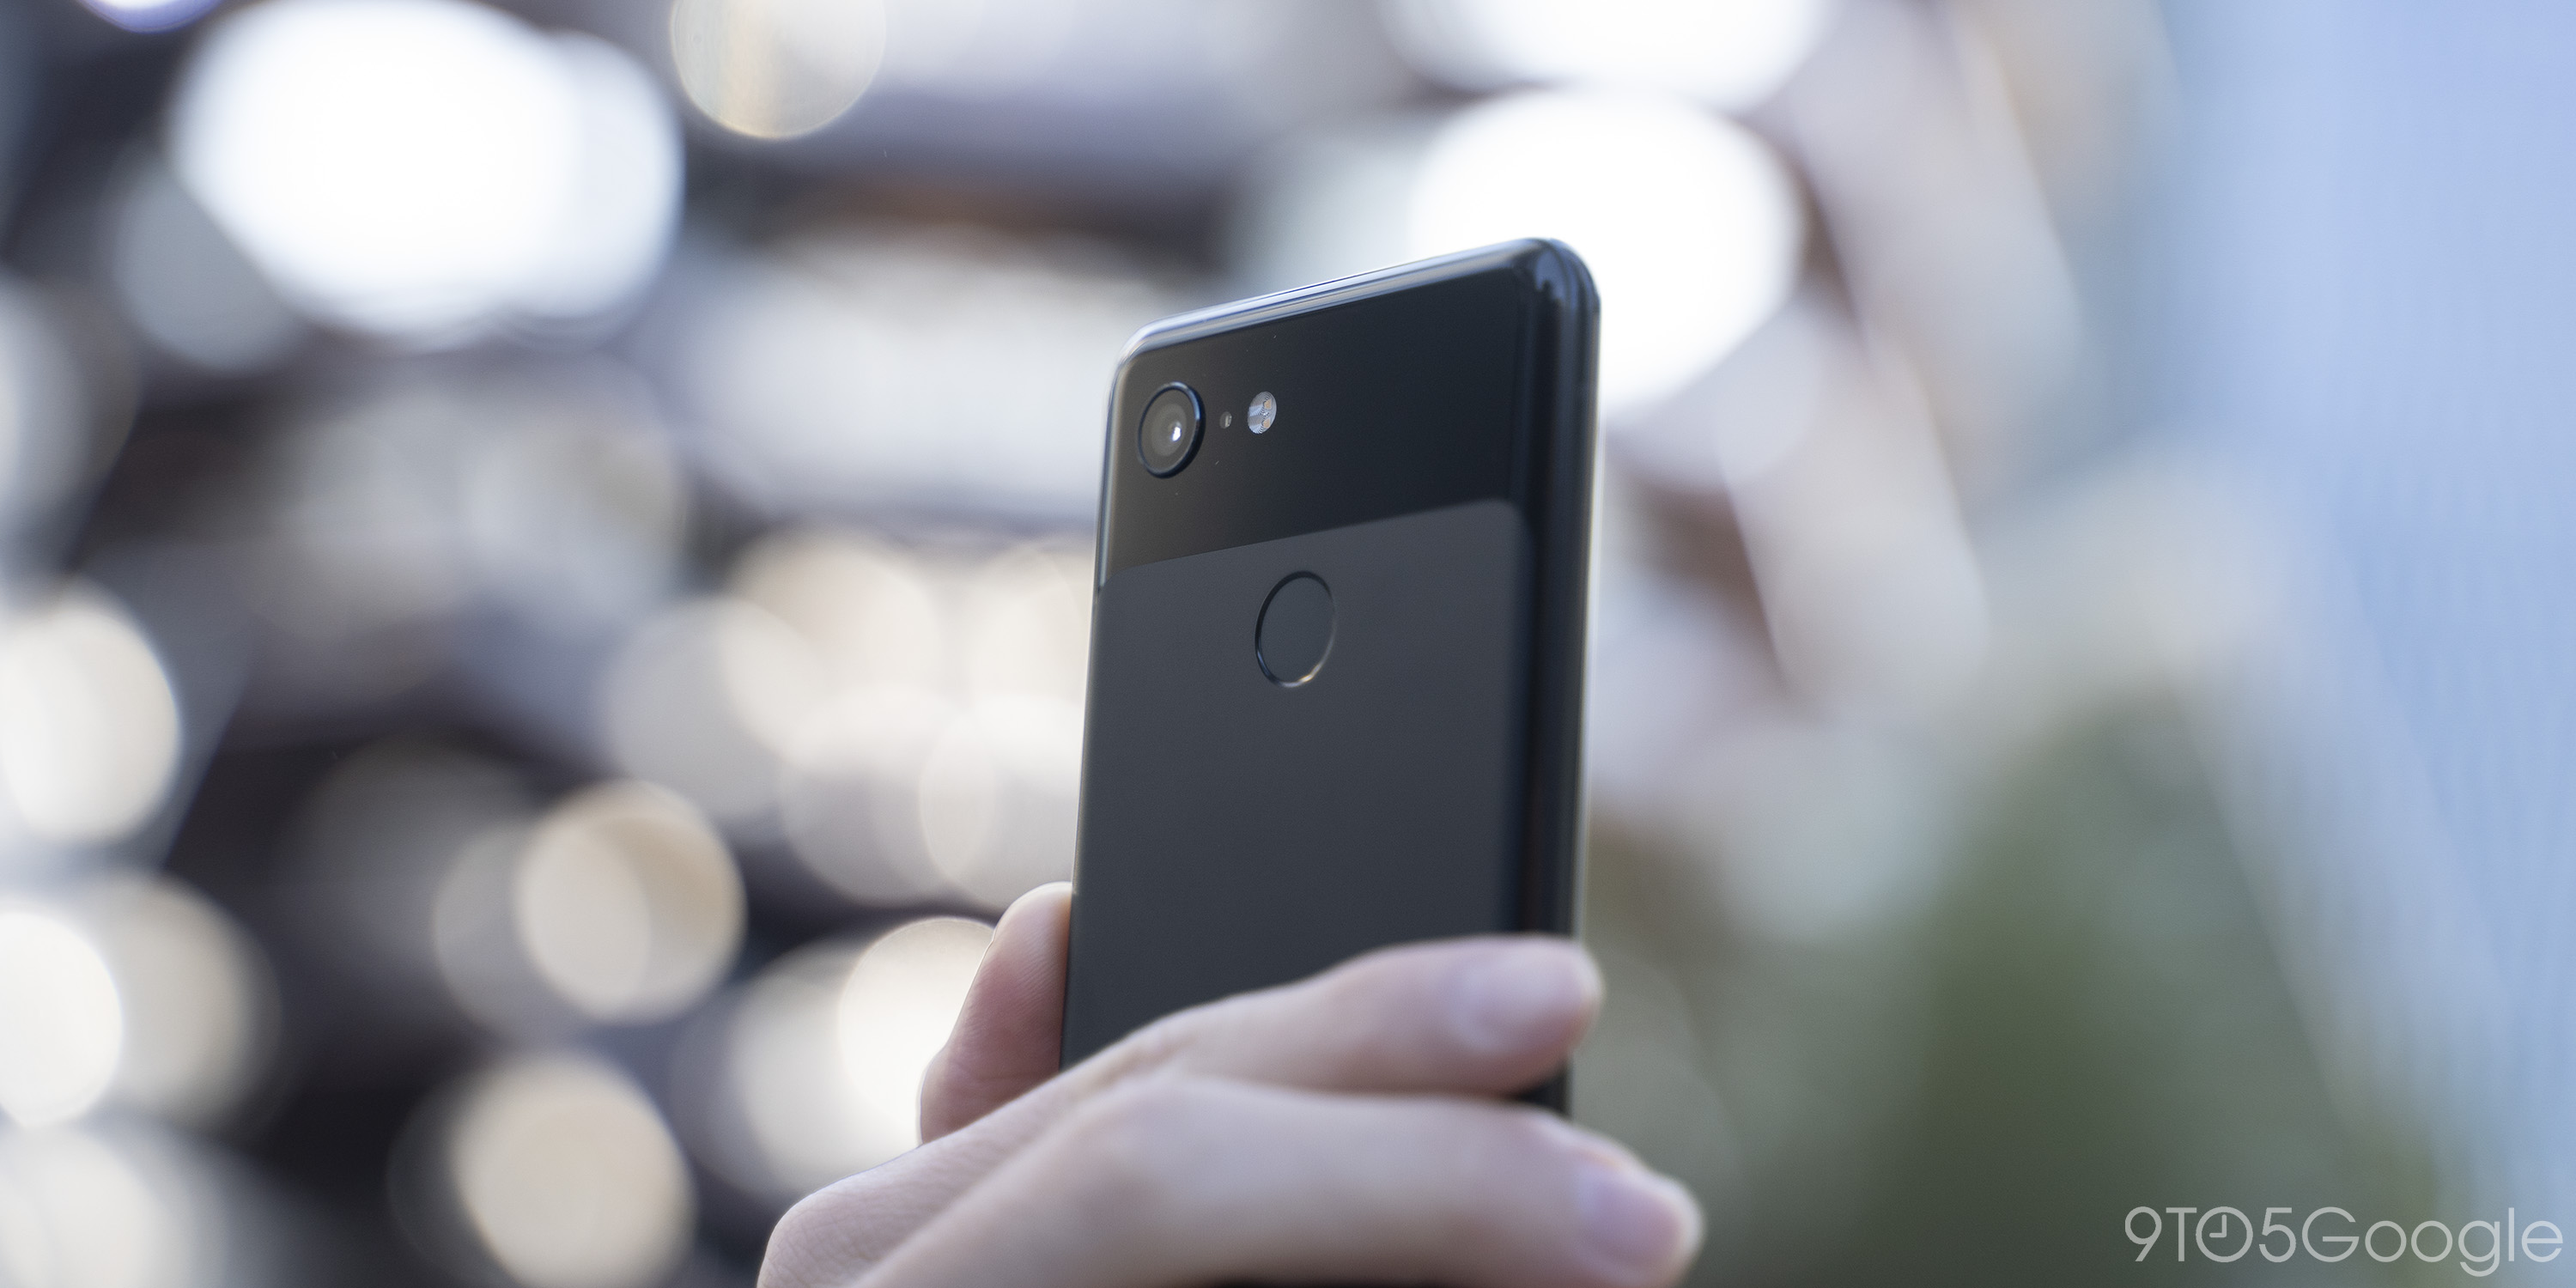 Opinion: Android’s update problem fails the Pixel 3 and other phones on security, not features